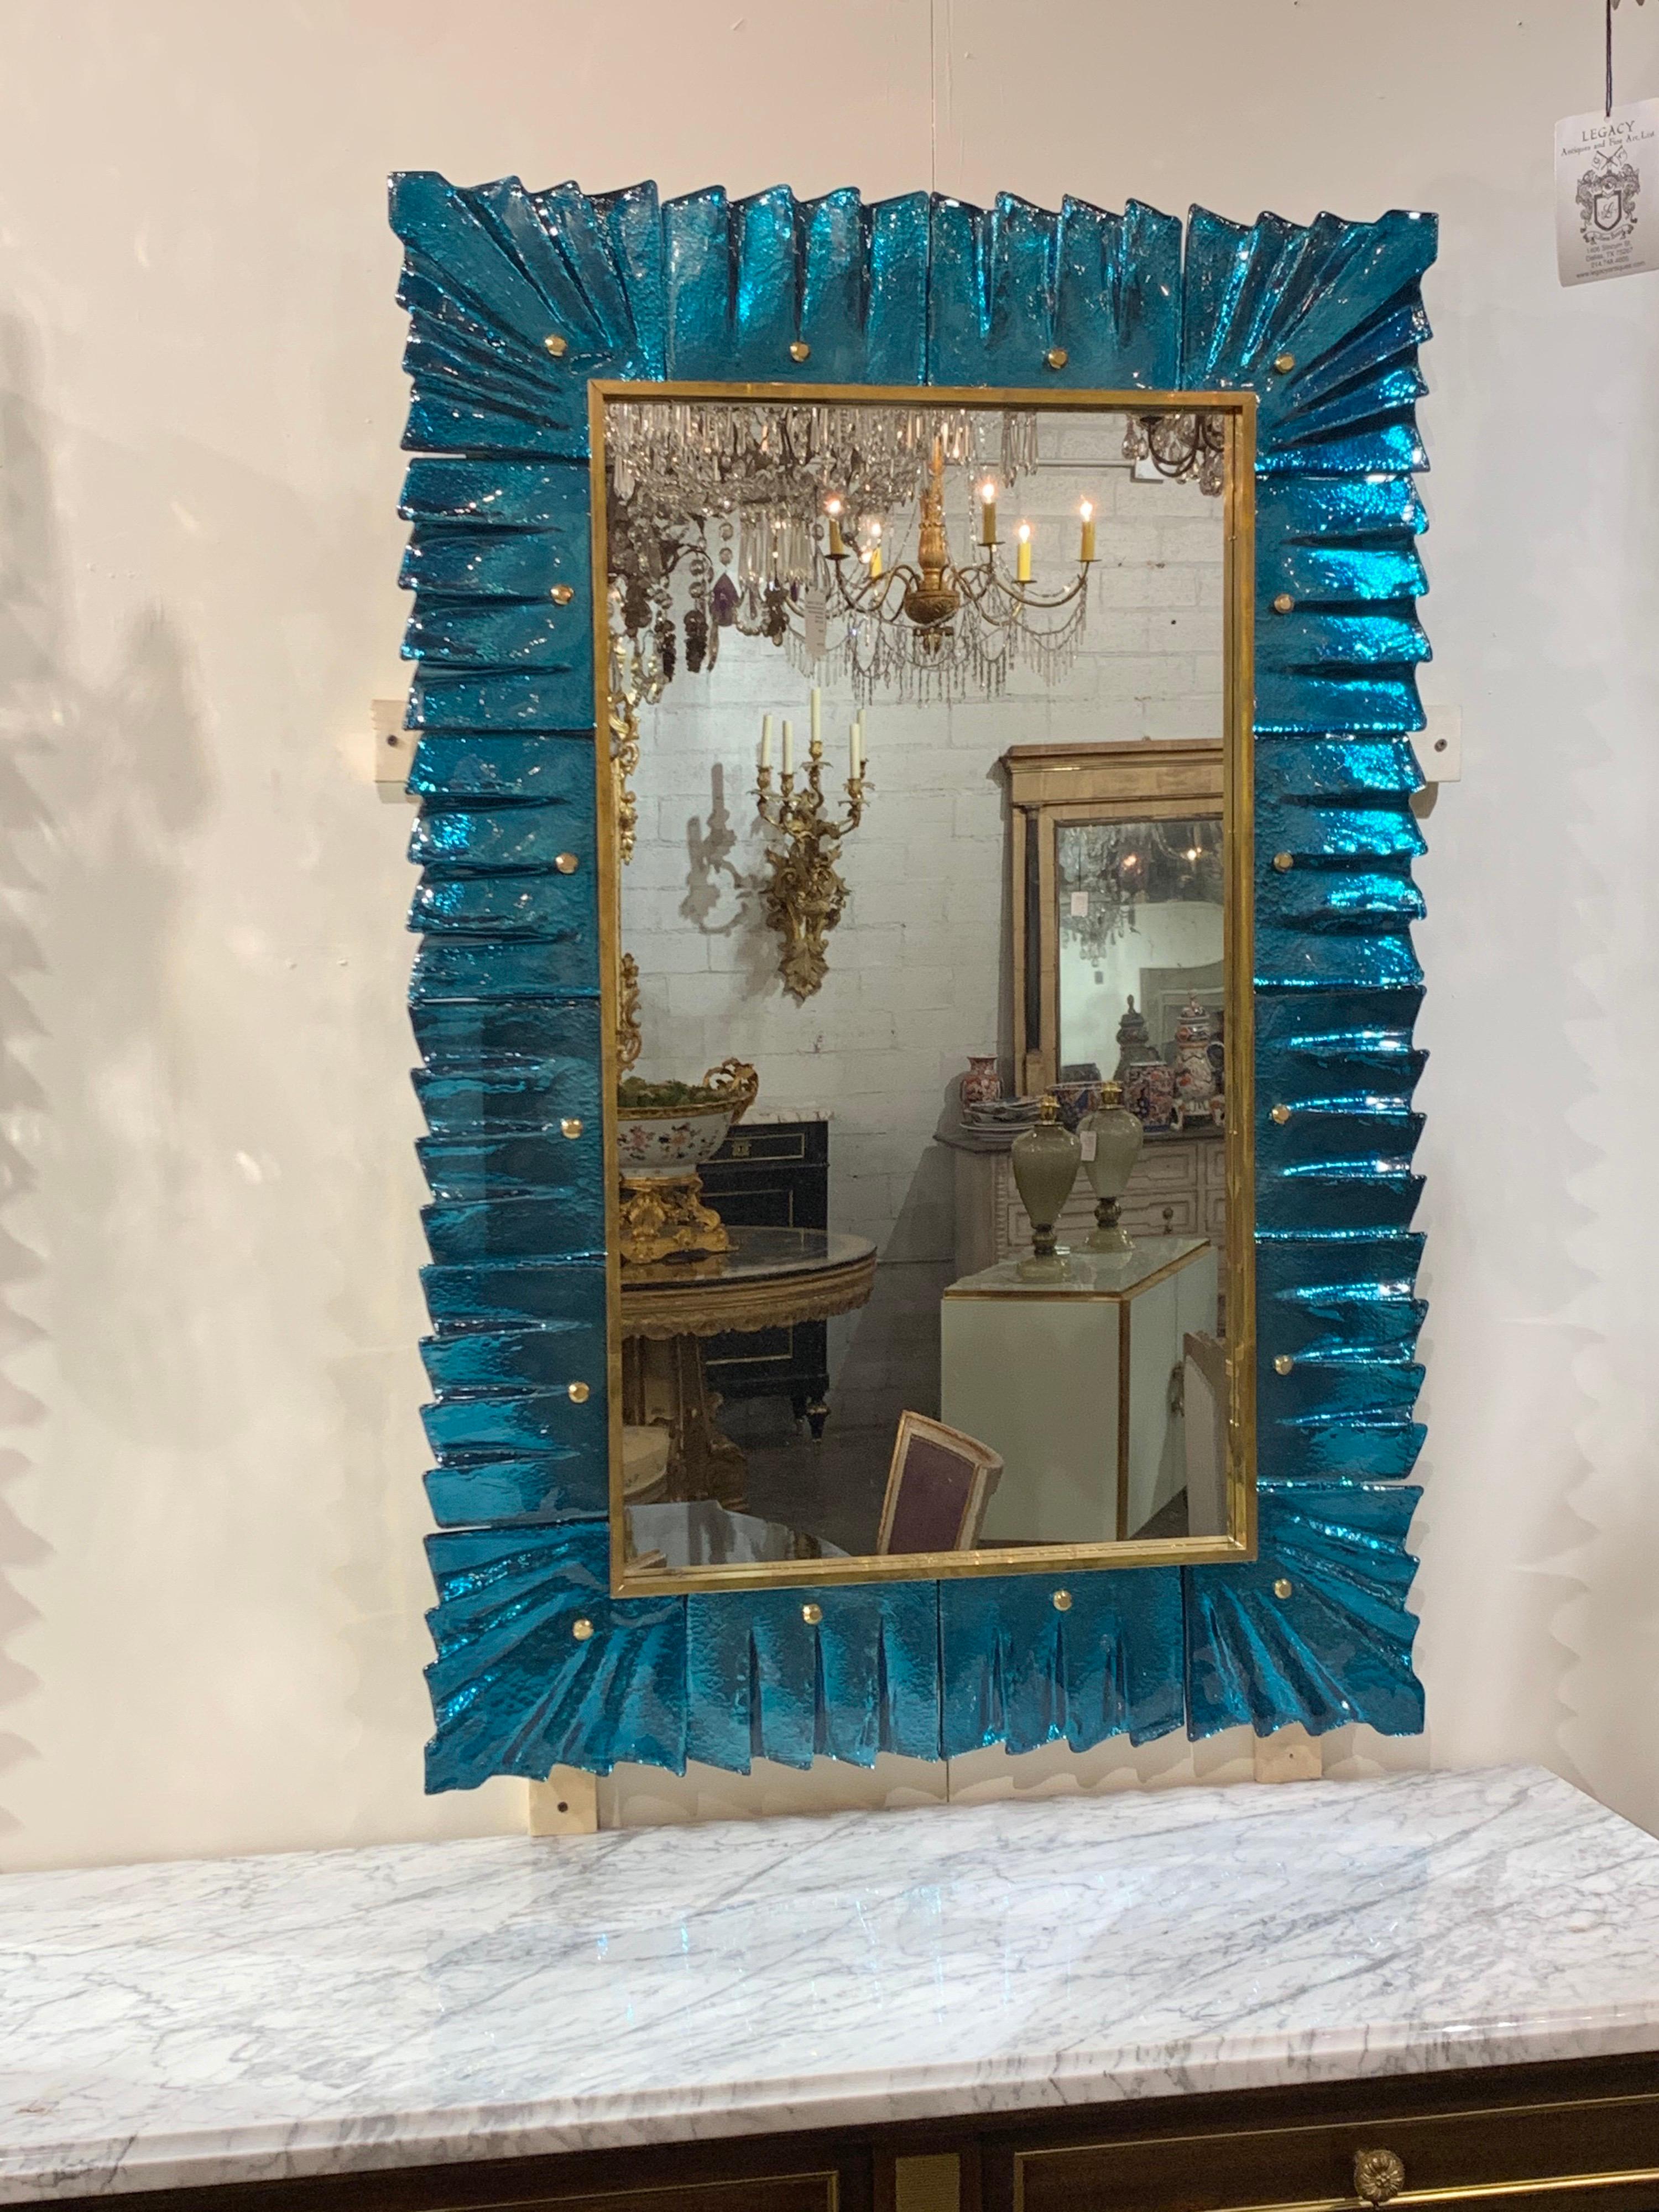 Fabulous modern teal colored Murano glass mirrors. The color and brilliance of these mirrors is spectacular!
Note: Price listed is per item.